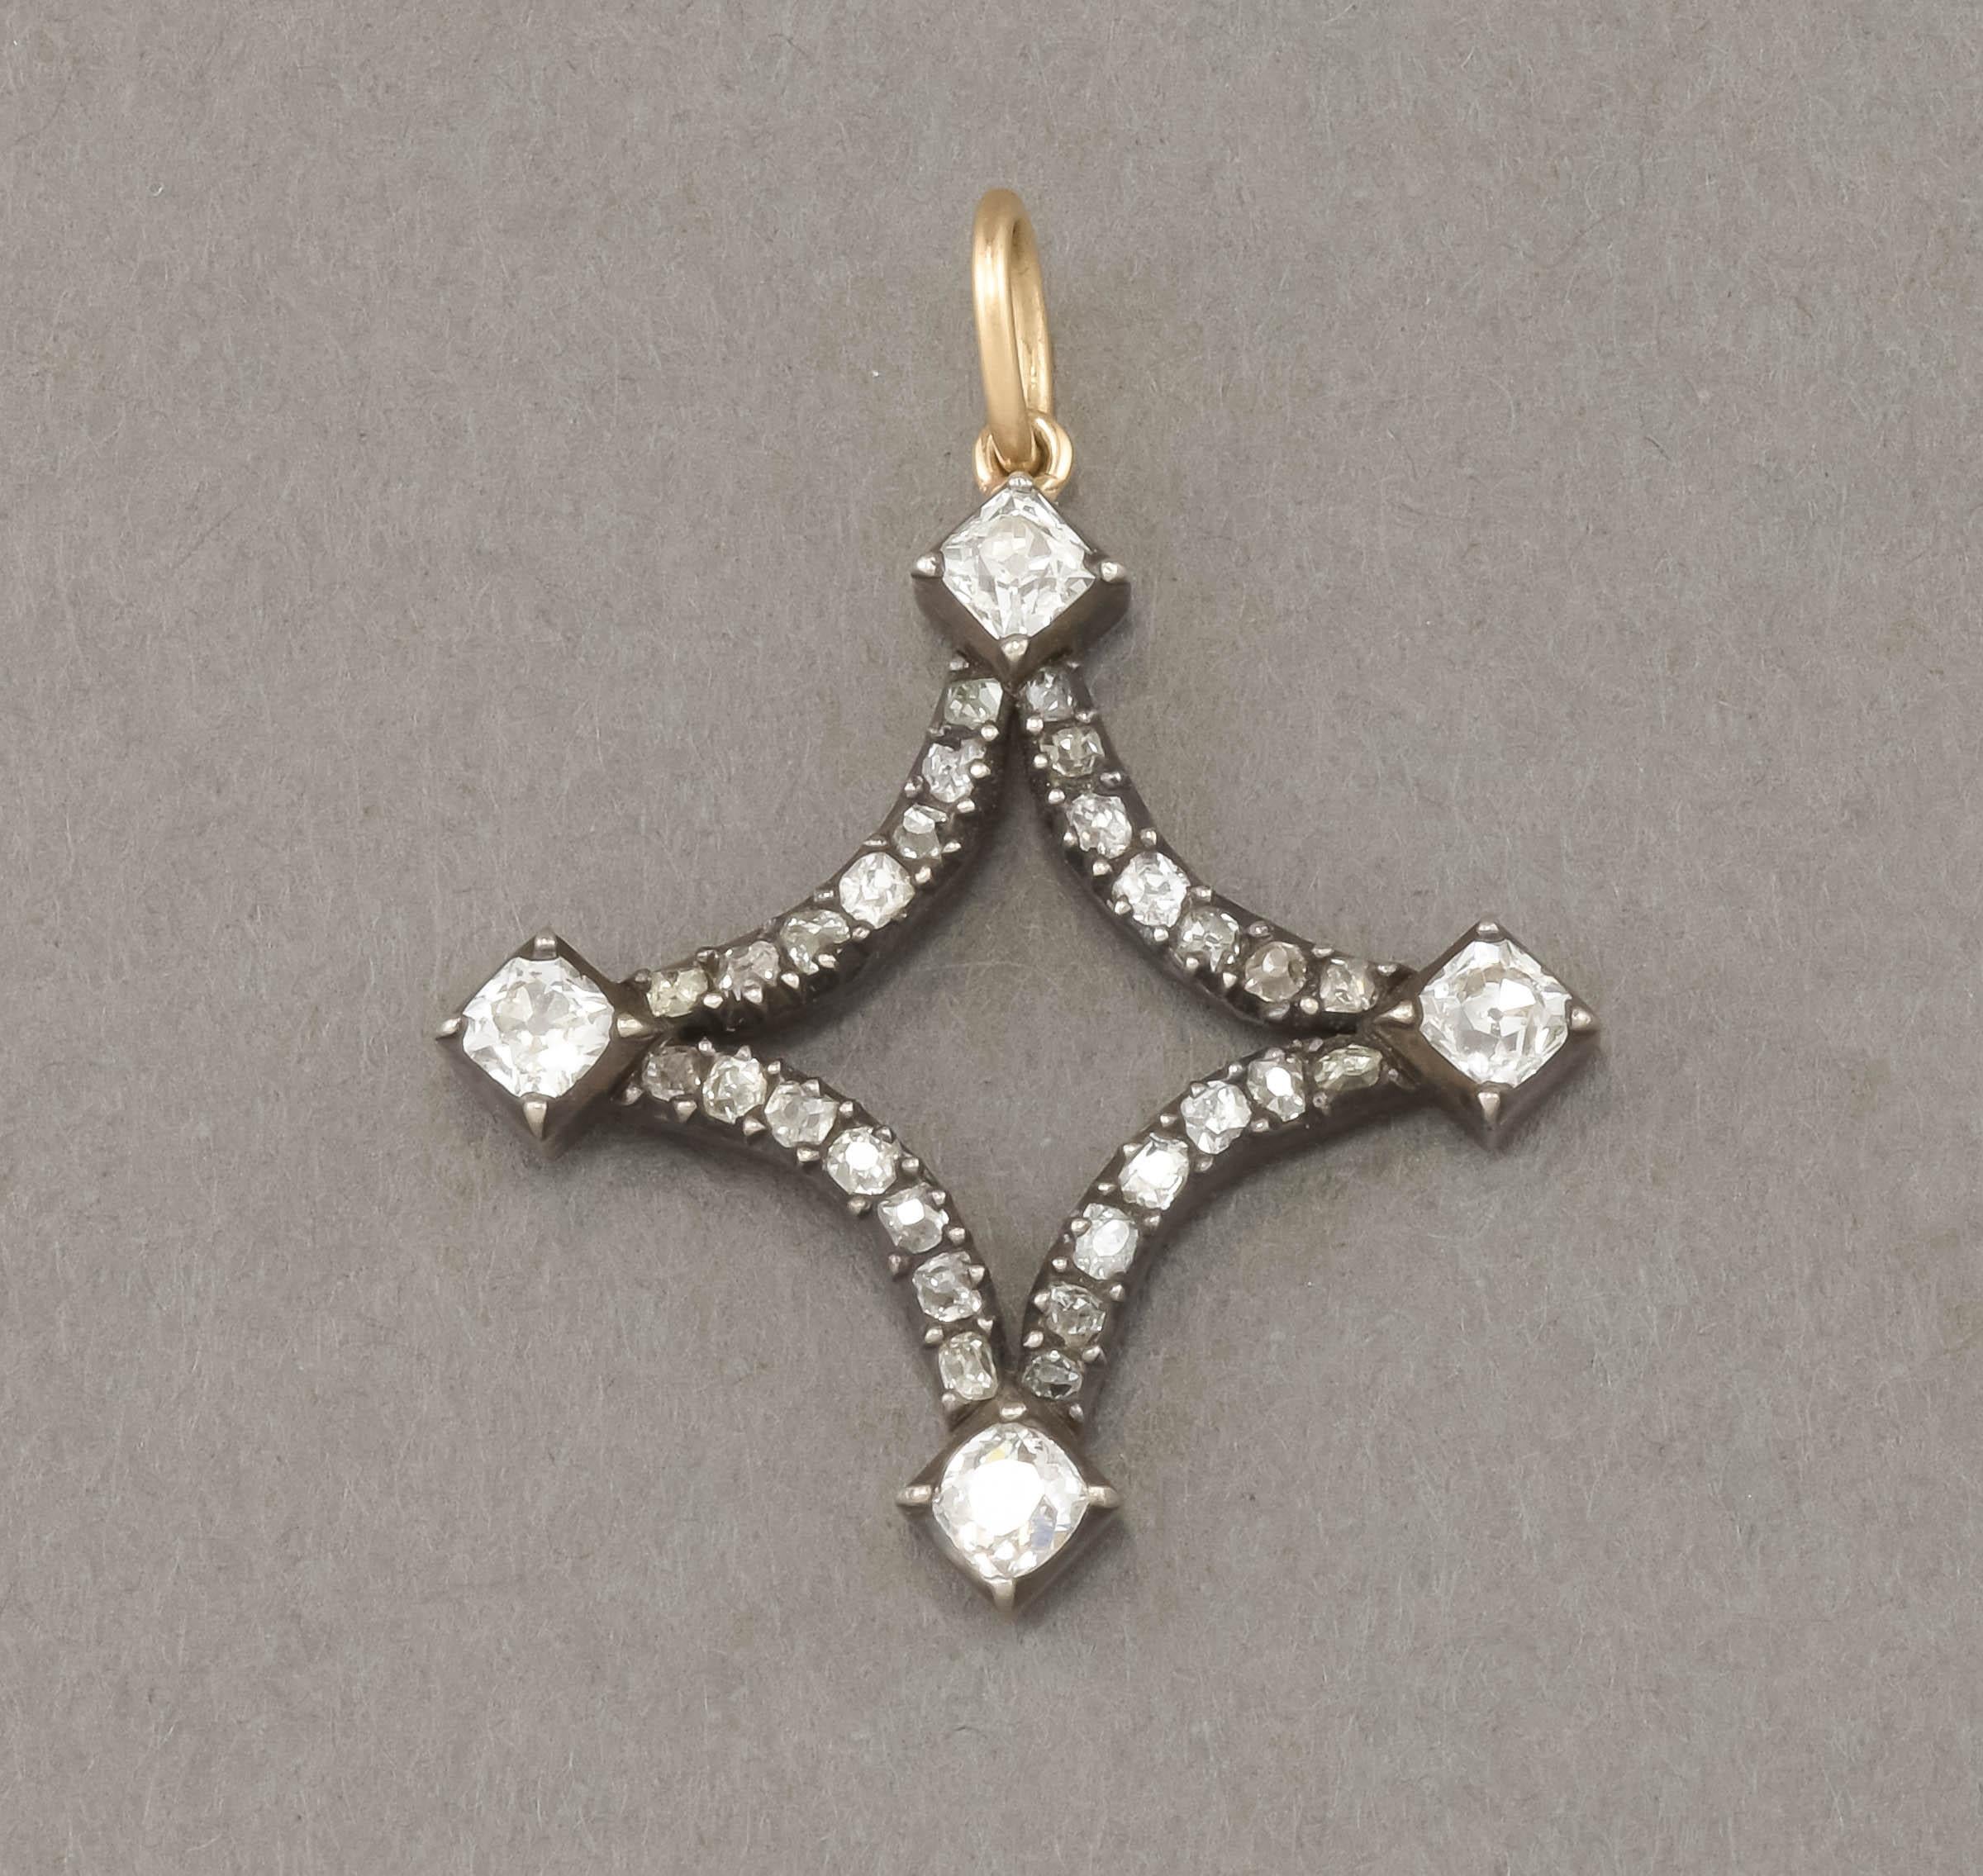 Offered is a striking antique diamond pendant in the shape of a stylized star.  Chunky & fiery old cushion cut diamonds dazzle in this piece that was converted from a larger antique Georgian era piece.  Estimated carat weight is approximately 2